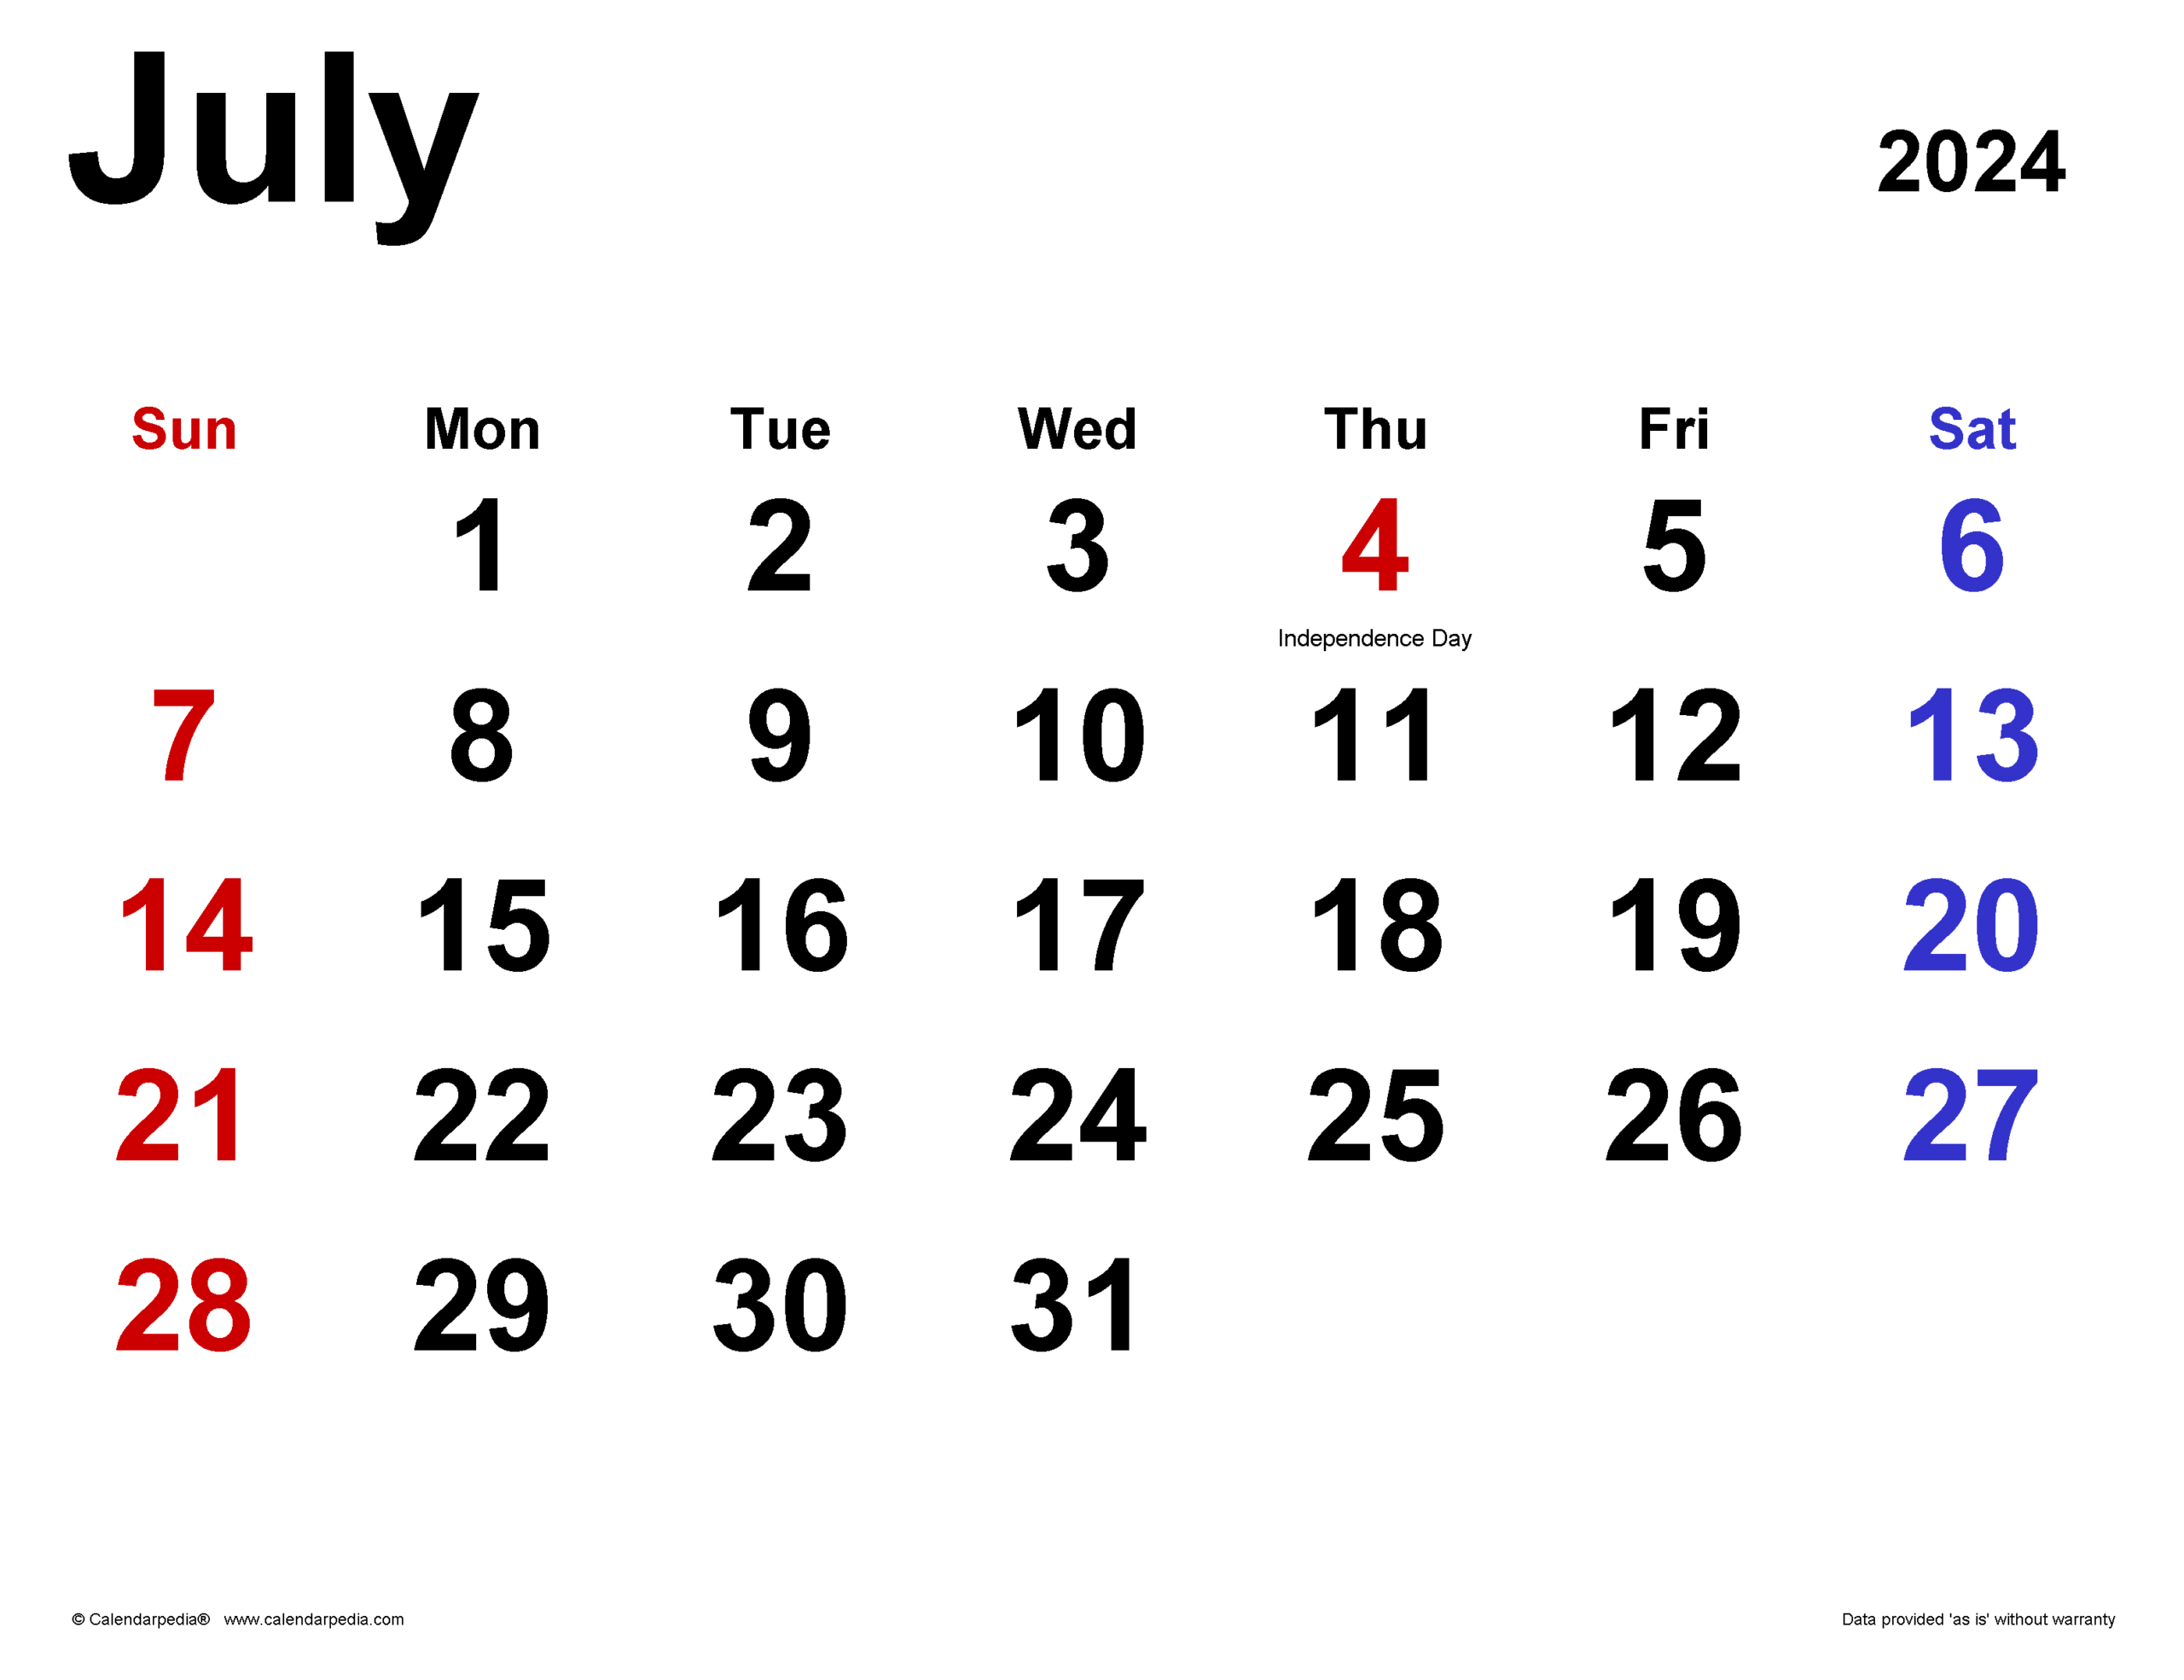 July 2024 Calendar | Templates For Word, Excel And Pdf for 2 July 2024 Calendar Printable